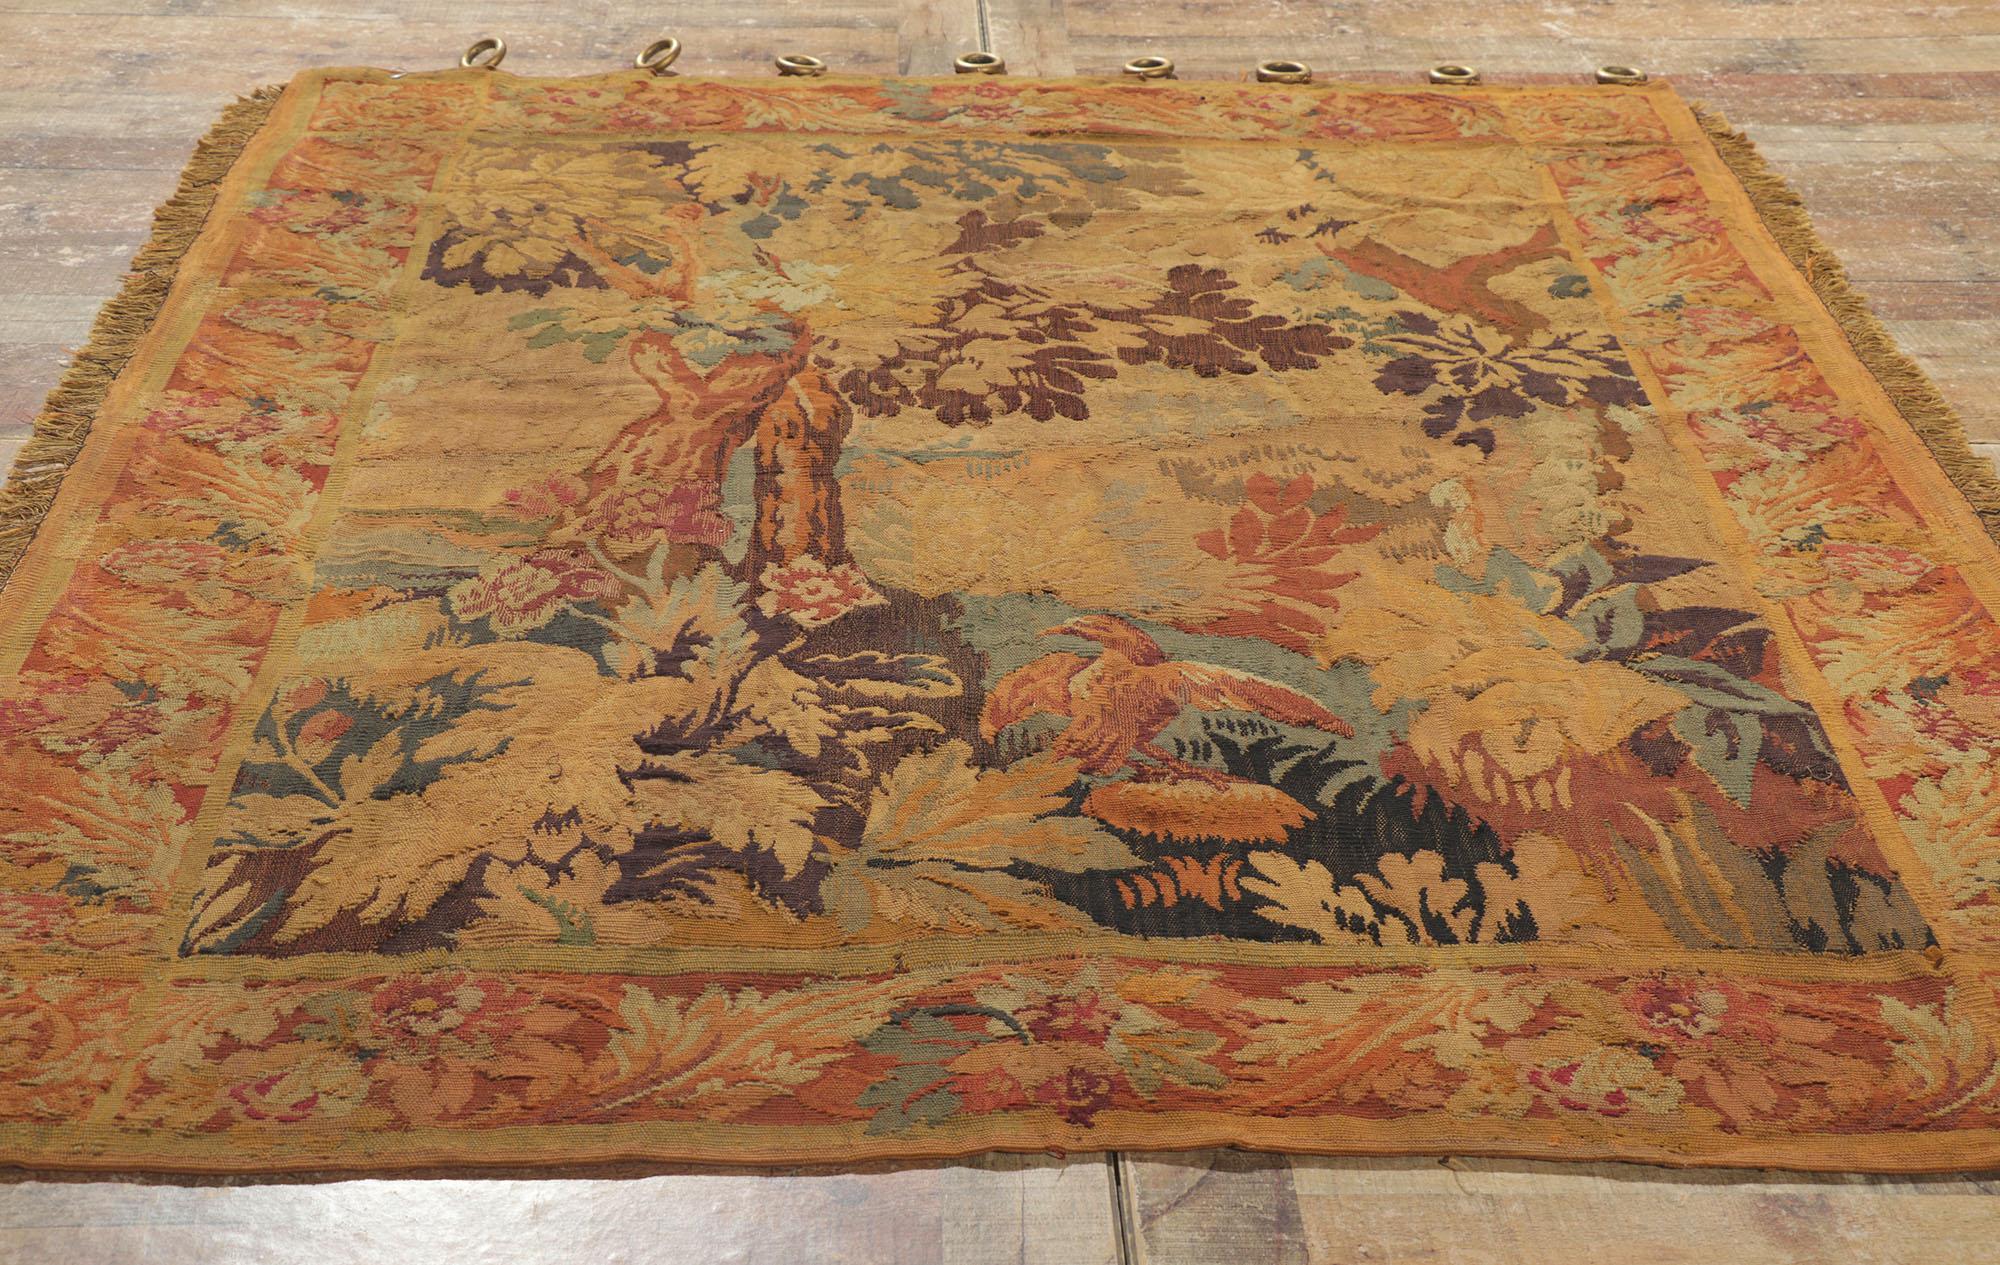 Antique French Tapestry For Sale 1